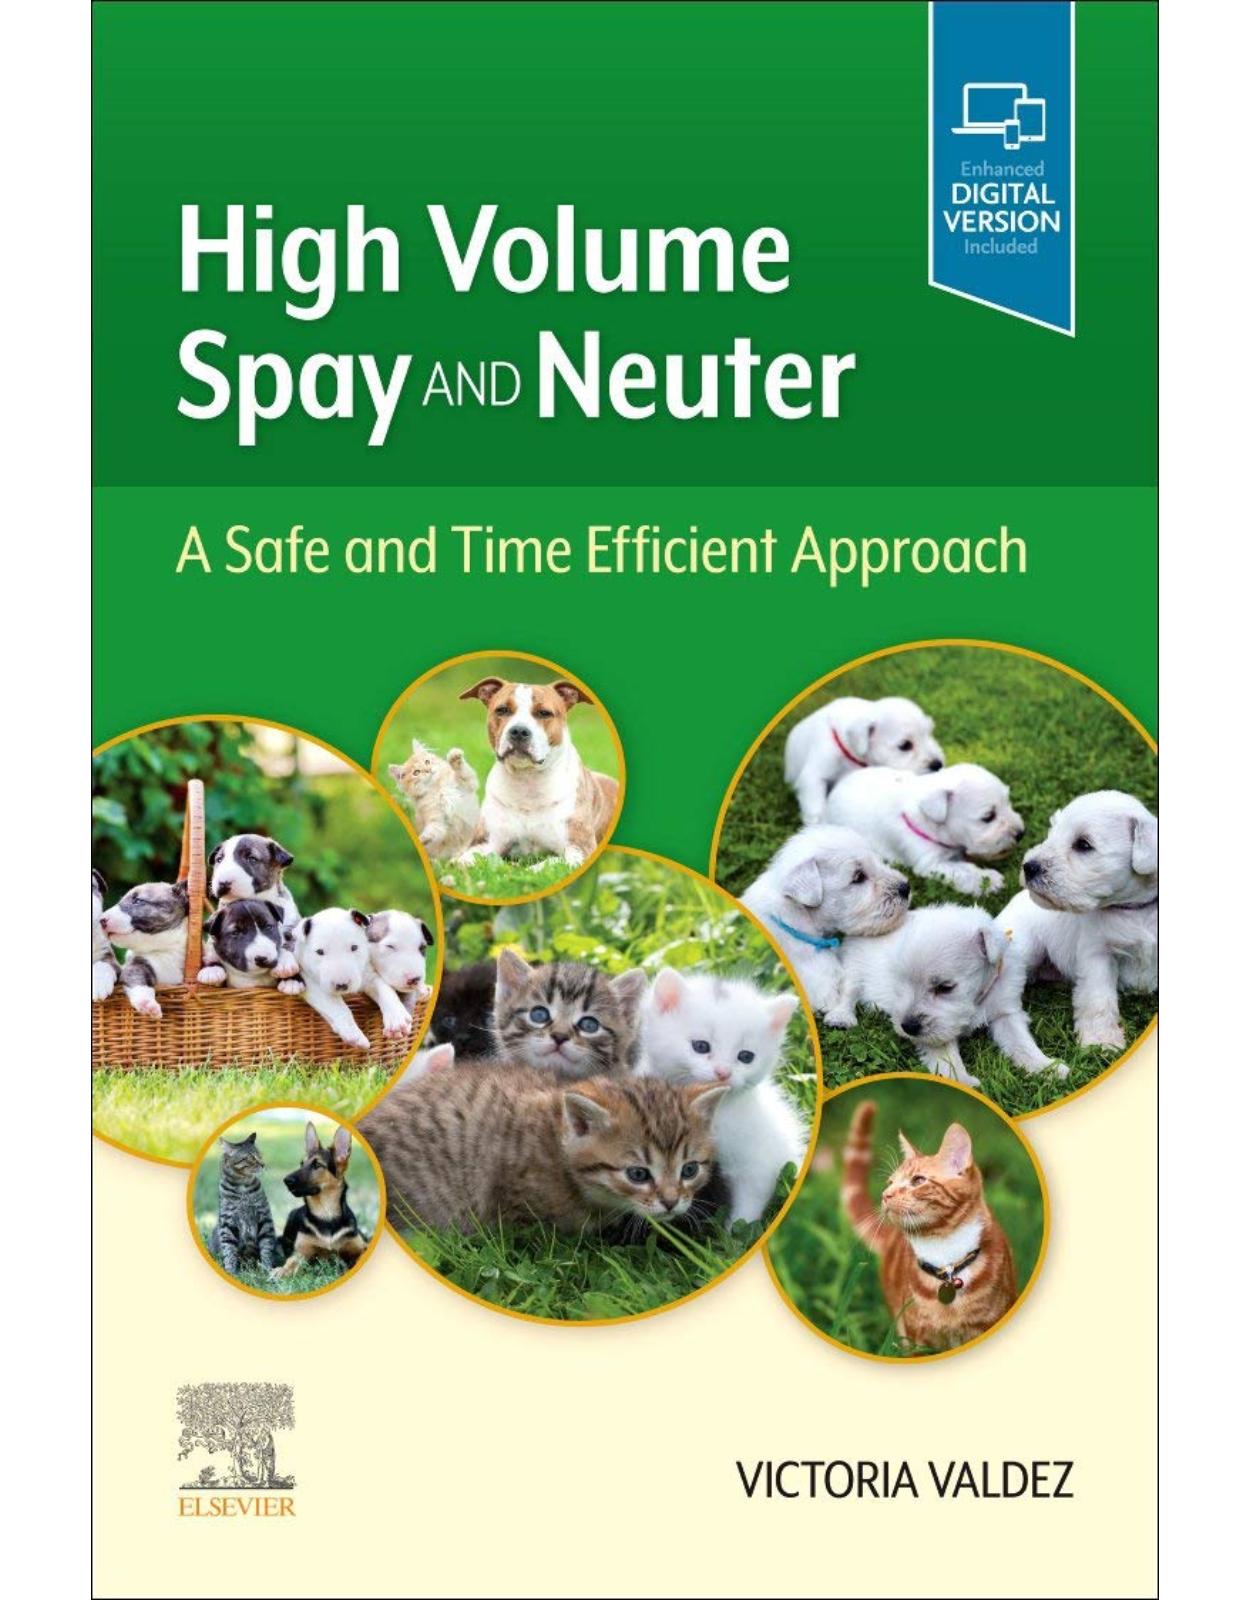 High Volume Spay and Neuter: A Safe and Time Efficient Approach